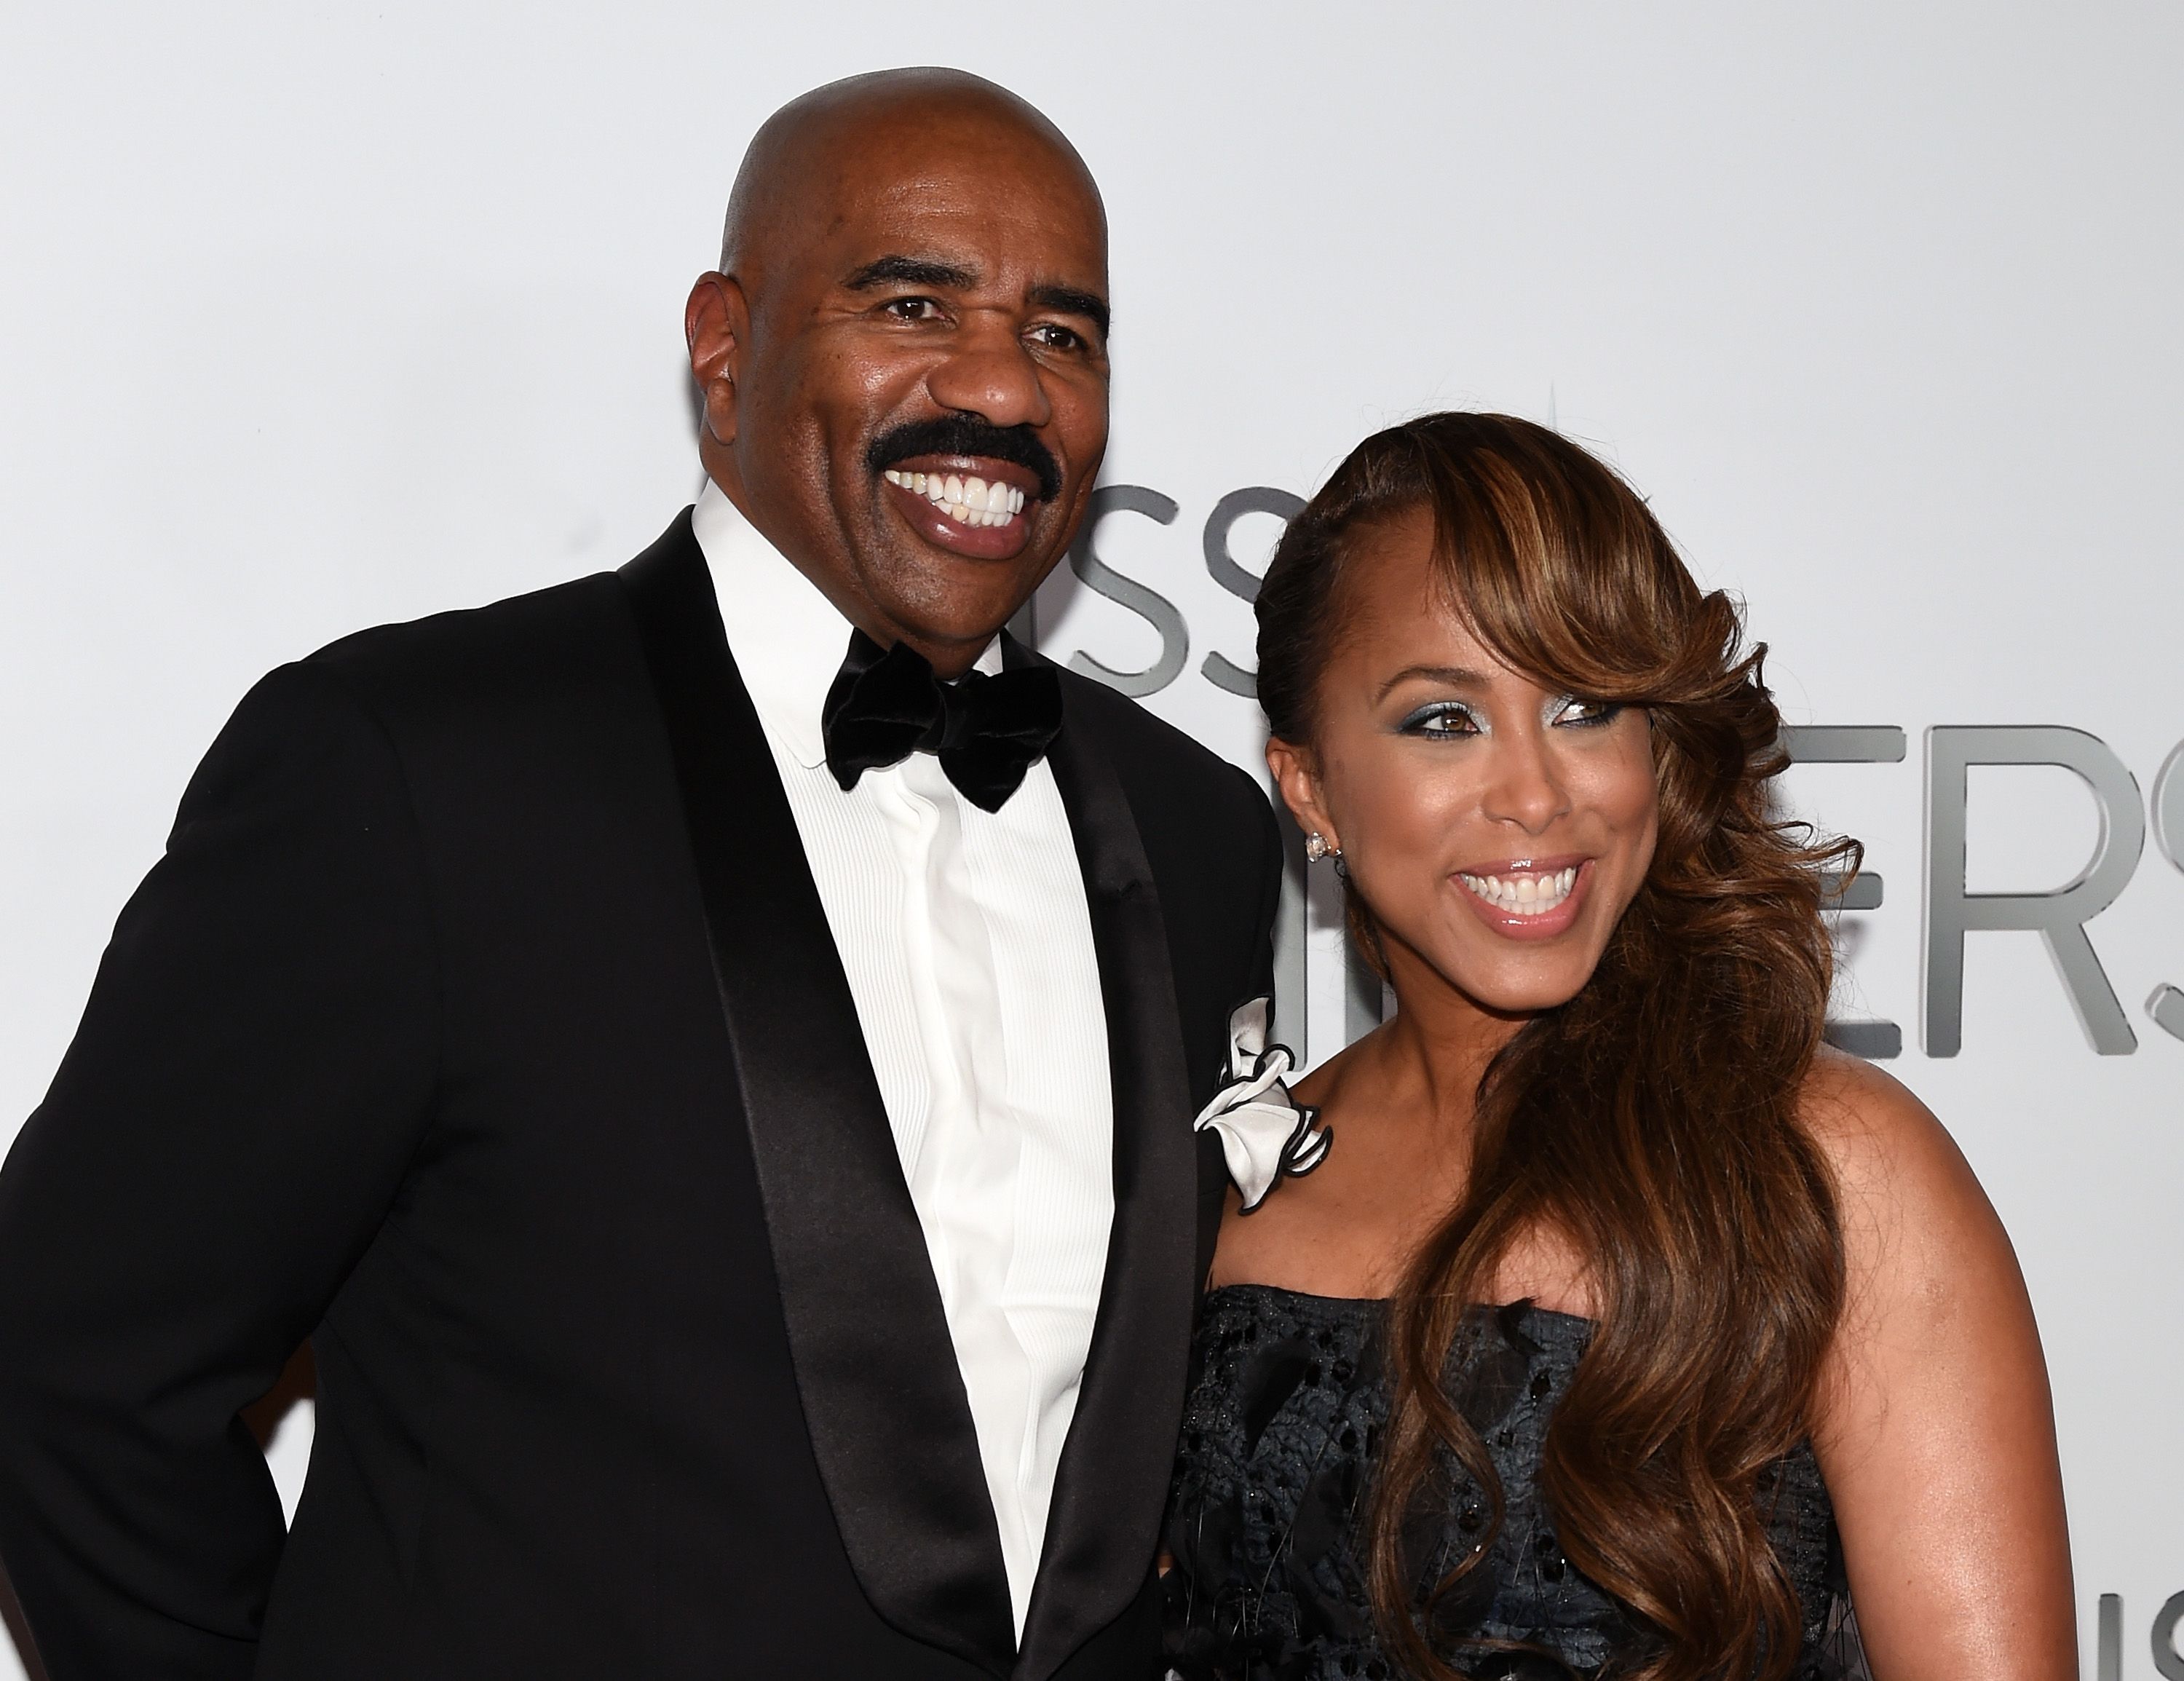 Steve Harvey and his wife Marjorie Harvey attend the 2015 Miss Universe Pageant at Planet Hollywood Resort & Casino on December 20, 2015 in Las Vegas, Nevada. | Photo: Getty Images.